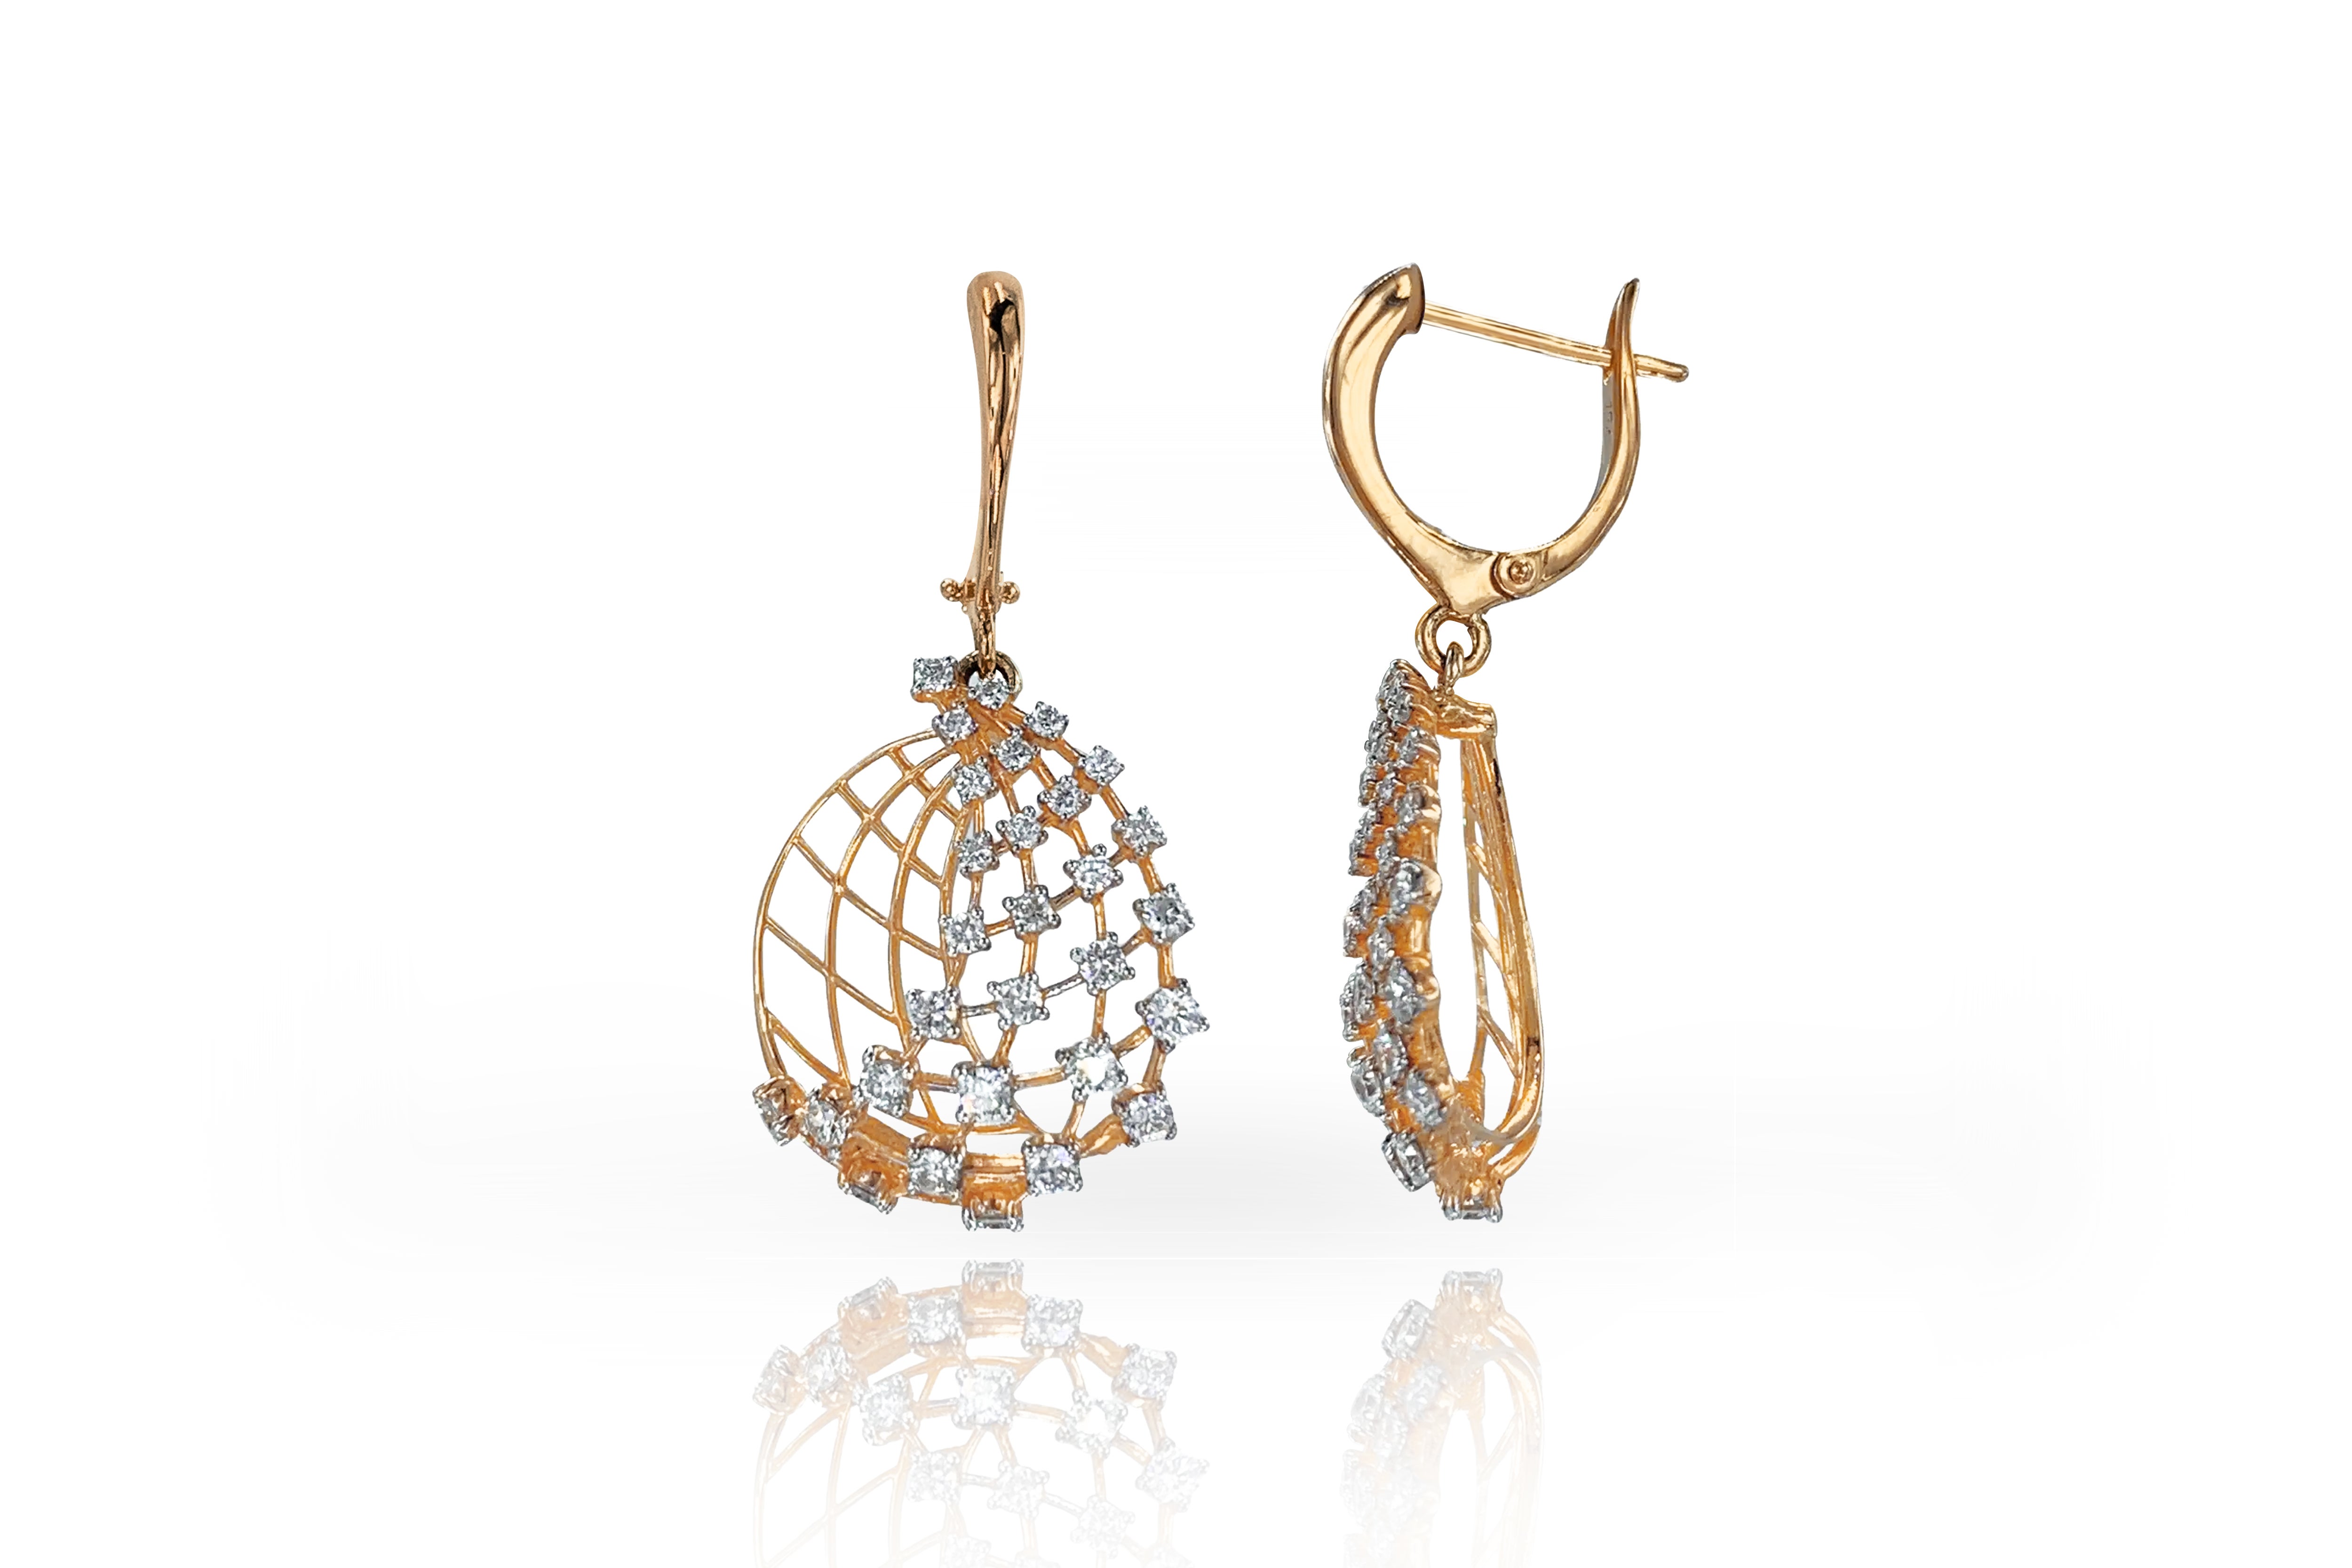 18karat Gold Dangle Earring Rose Gold Diamond Pave Fashion Earring
      A fashion Art Nouveau open filigree dangle earring meticulously crafted to mesmerize. Each part of this art piece shows the passion for jewelry from Oshi Jewels Designs Inc.   